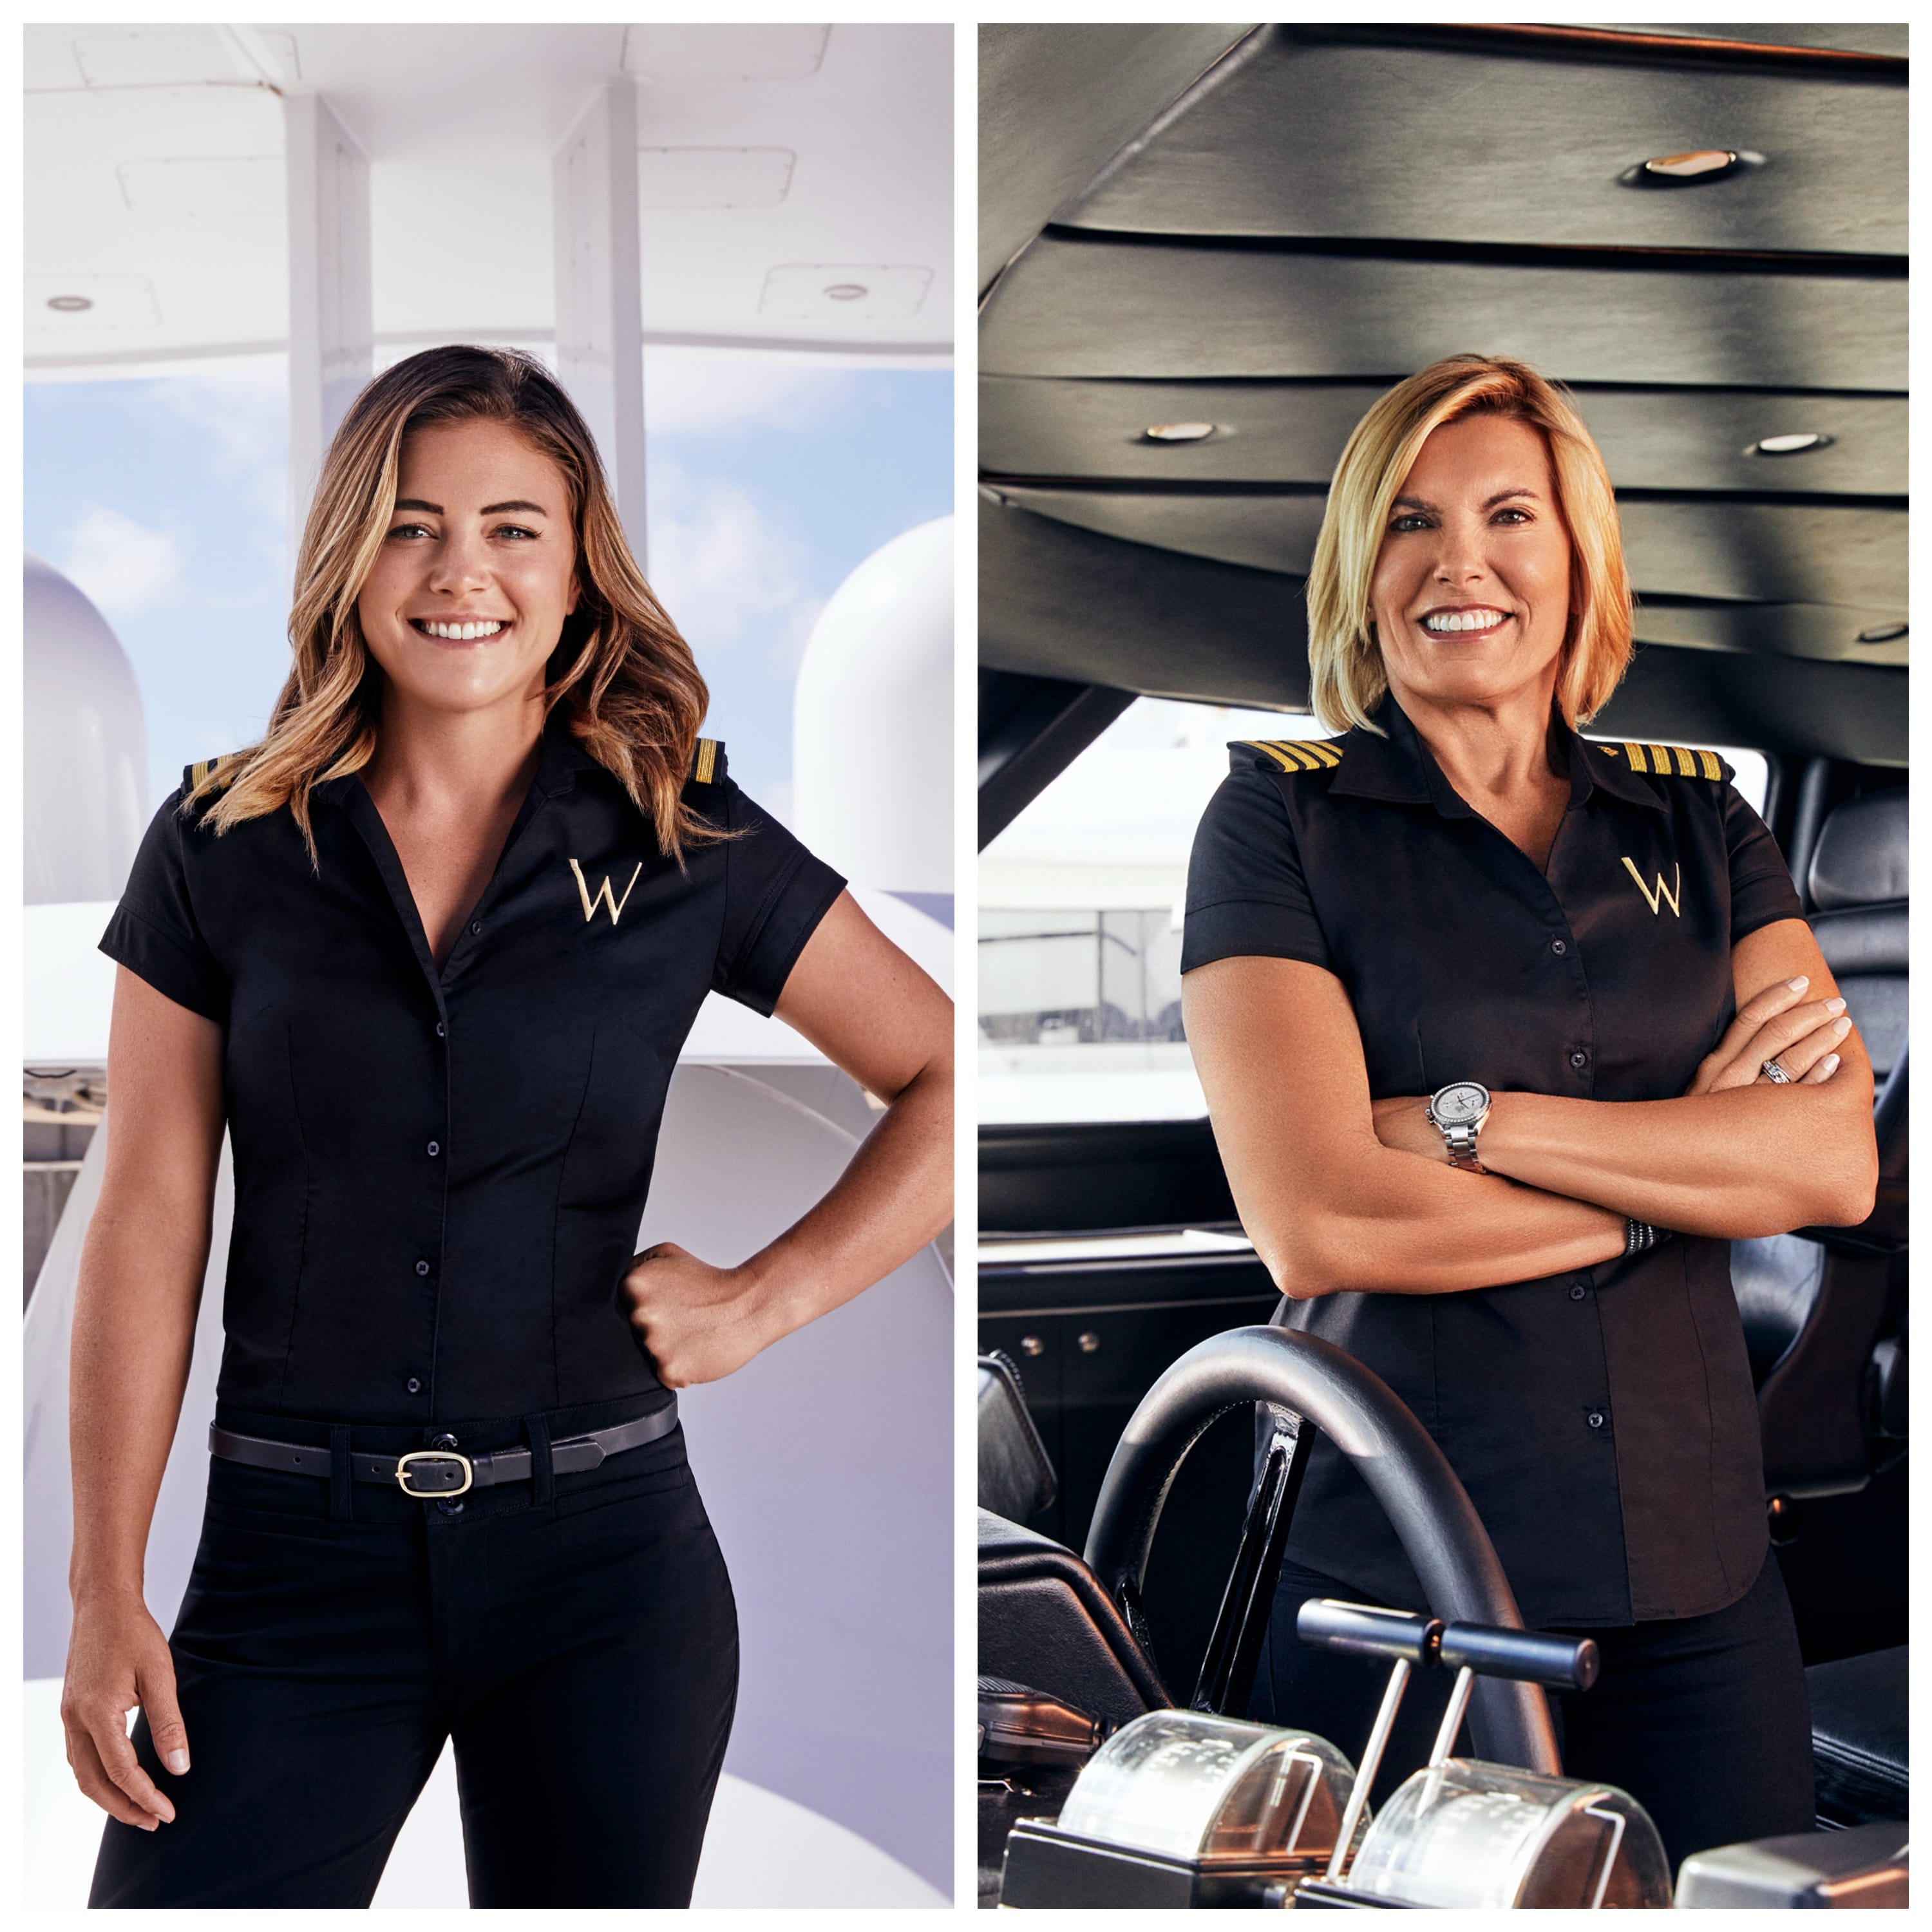 Malia White and Captain Sandy Yawn 'Below Deck Med' cast photos